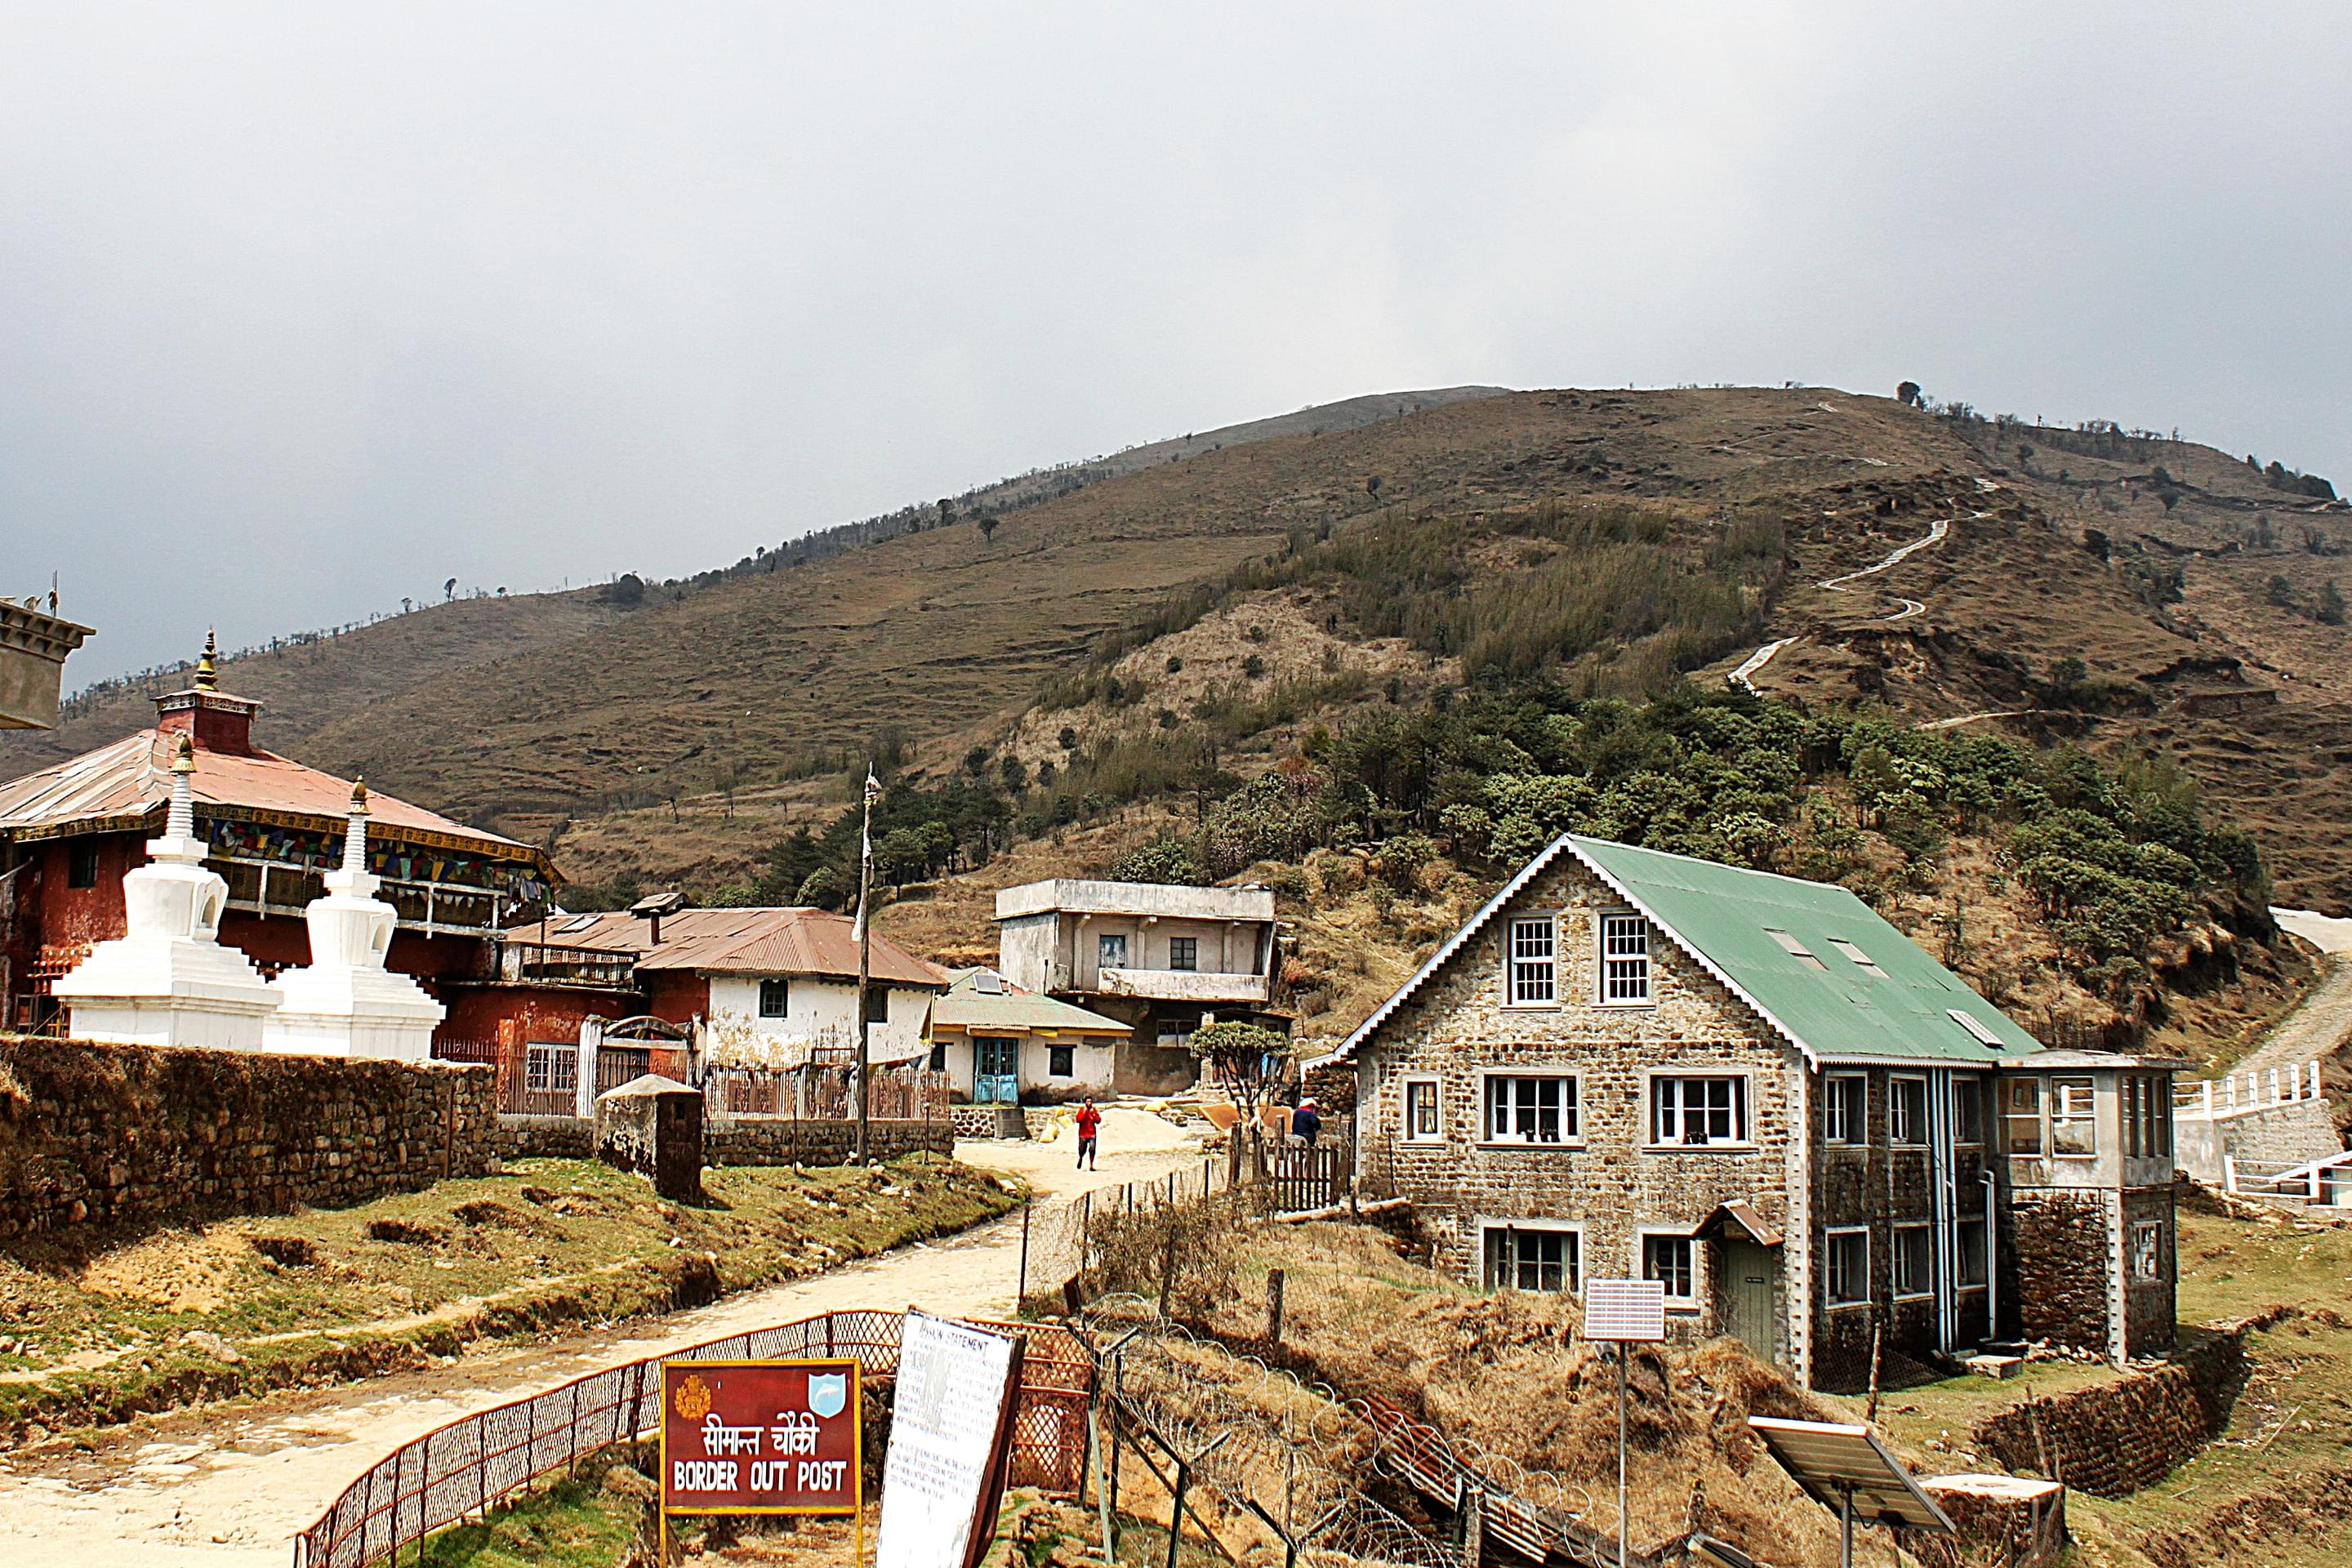 Meghma Overview